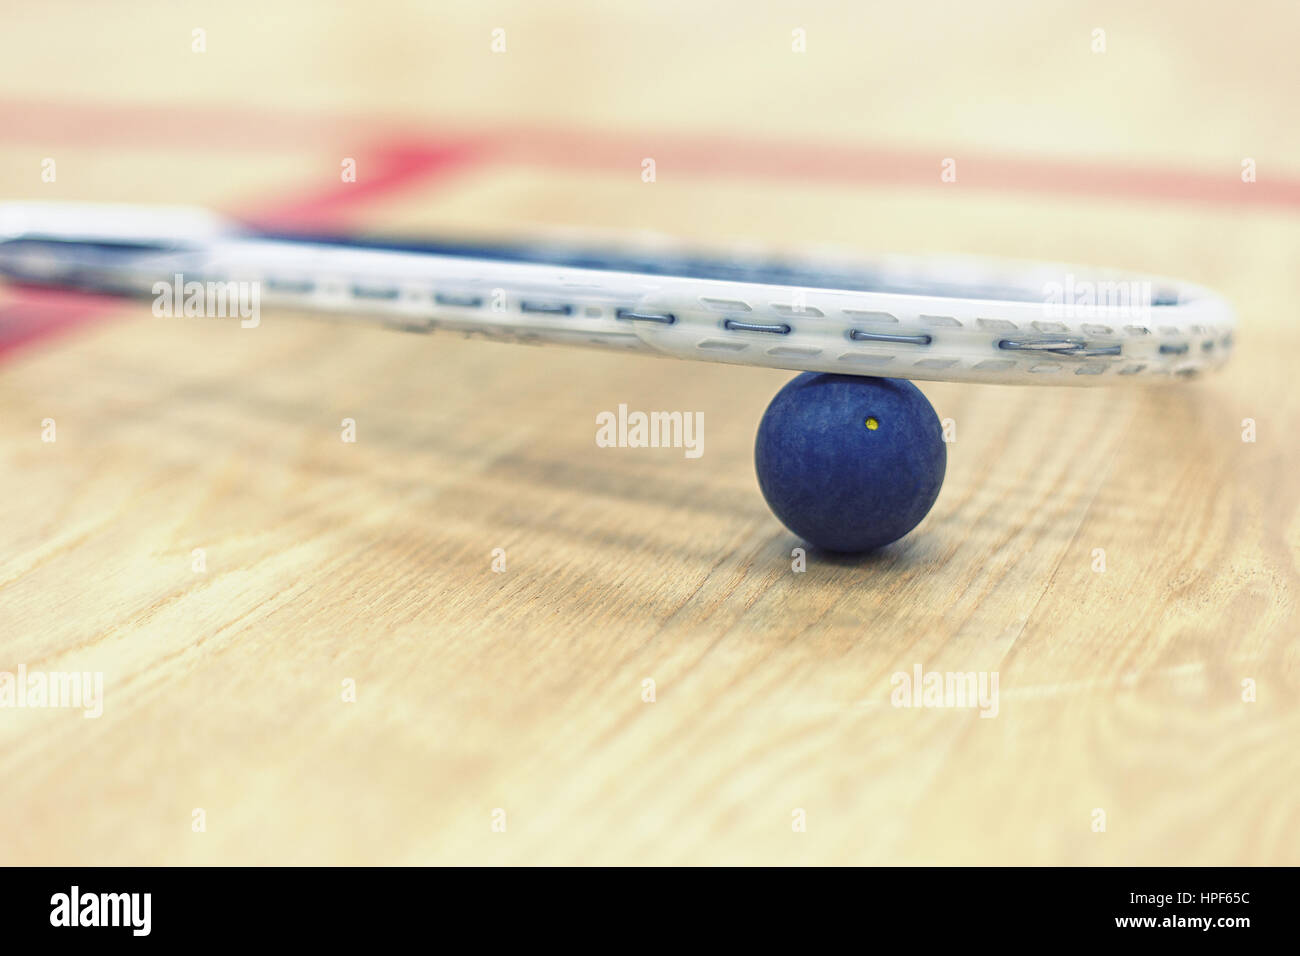 Close up of a squash racket and ball on the wooden background. Racquetball equipment. Squash ball between squash racket and floor on the court Stock Photo